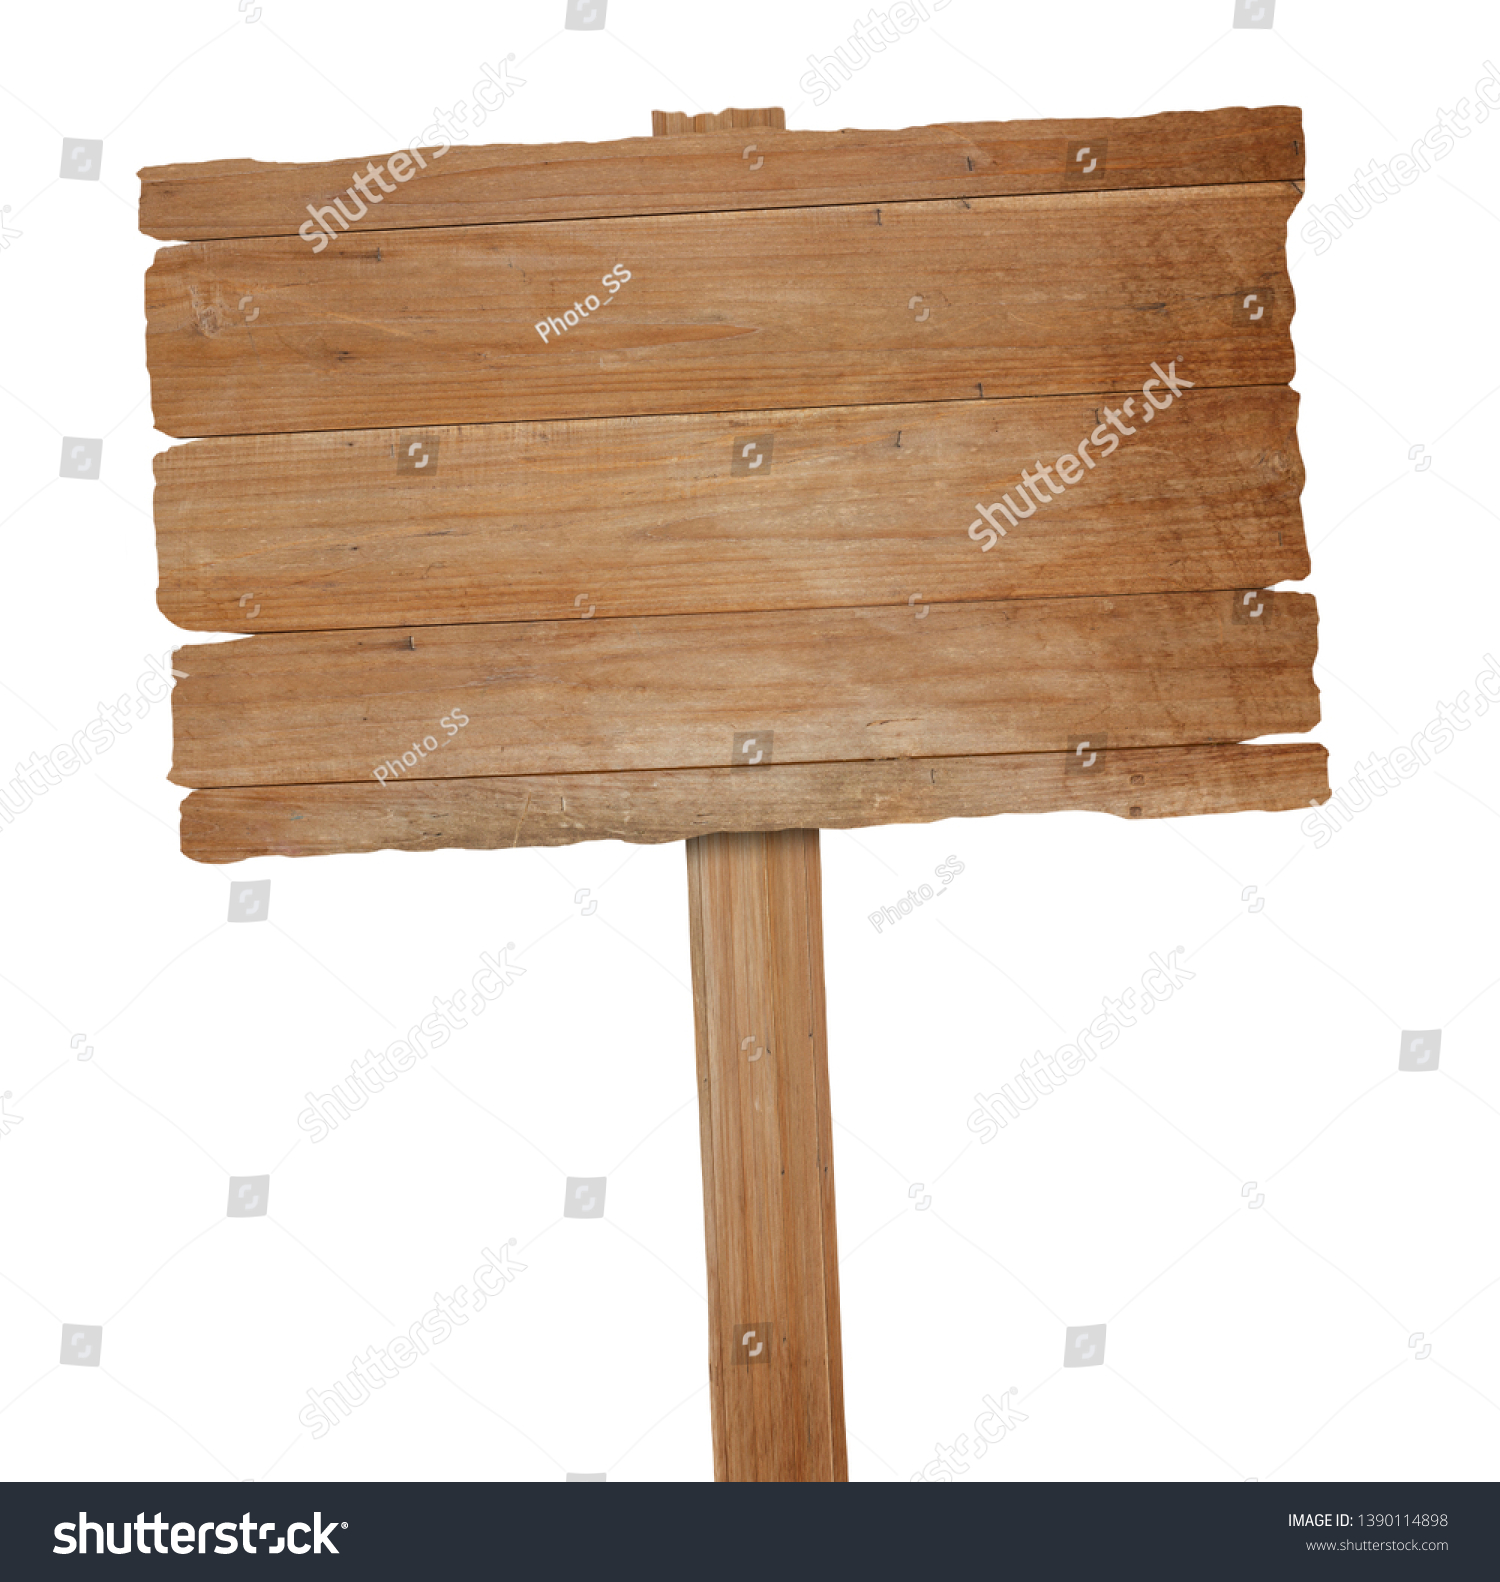 Wooden sign isolated on white background with clipping path #1390114898